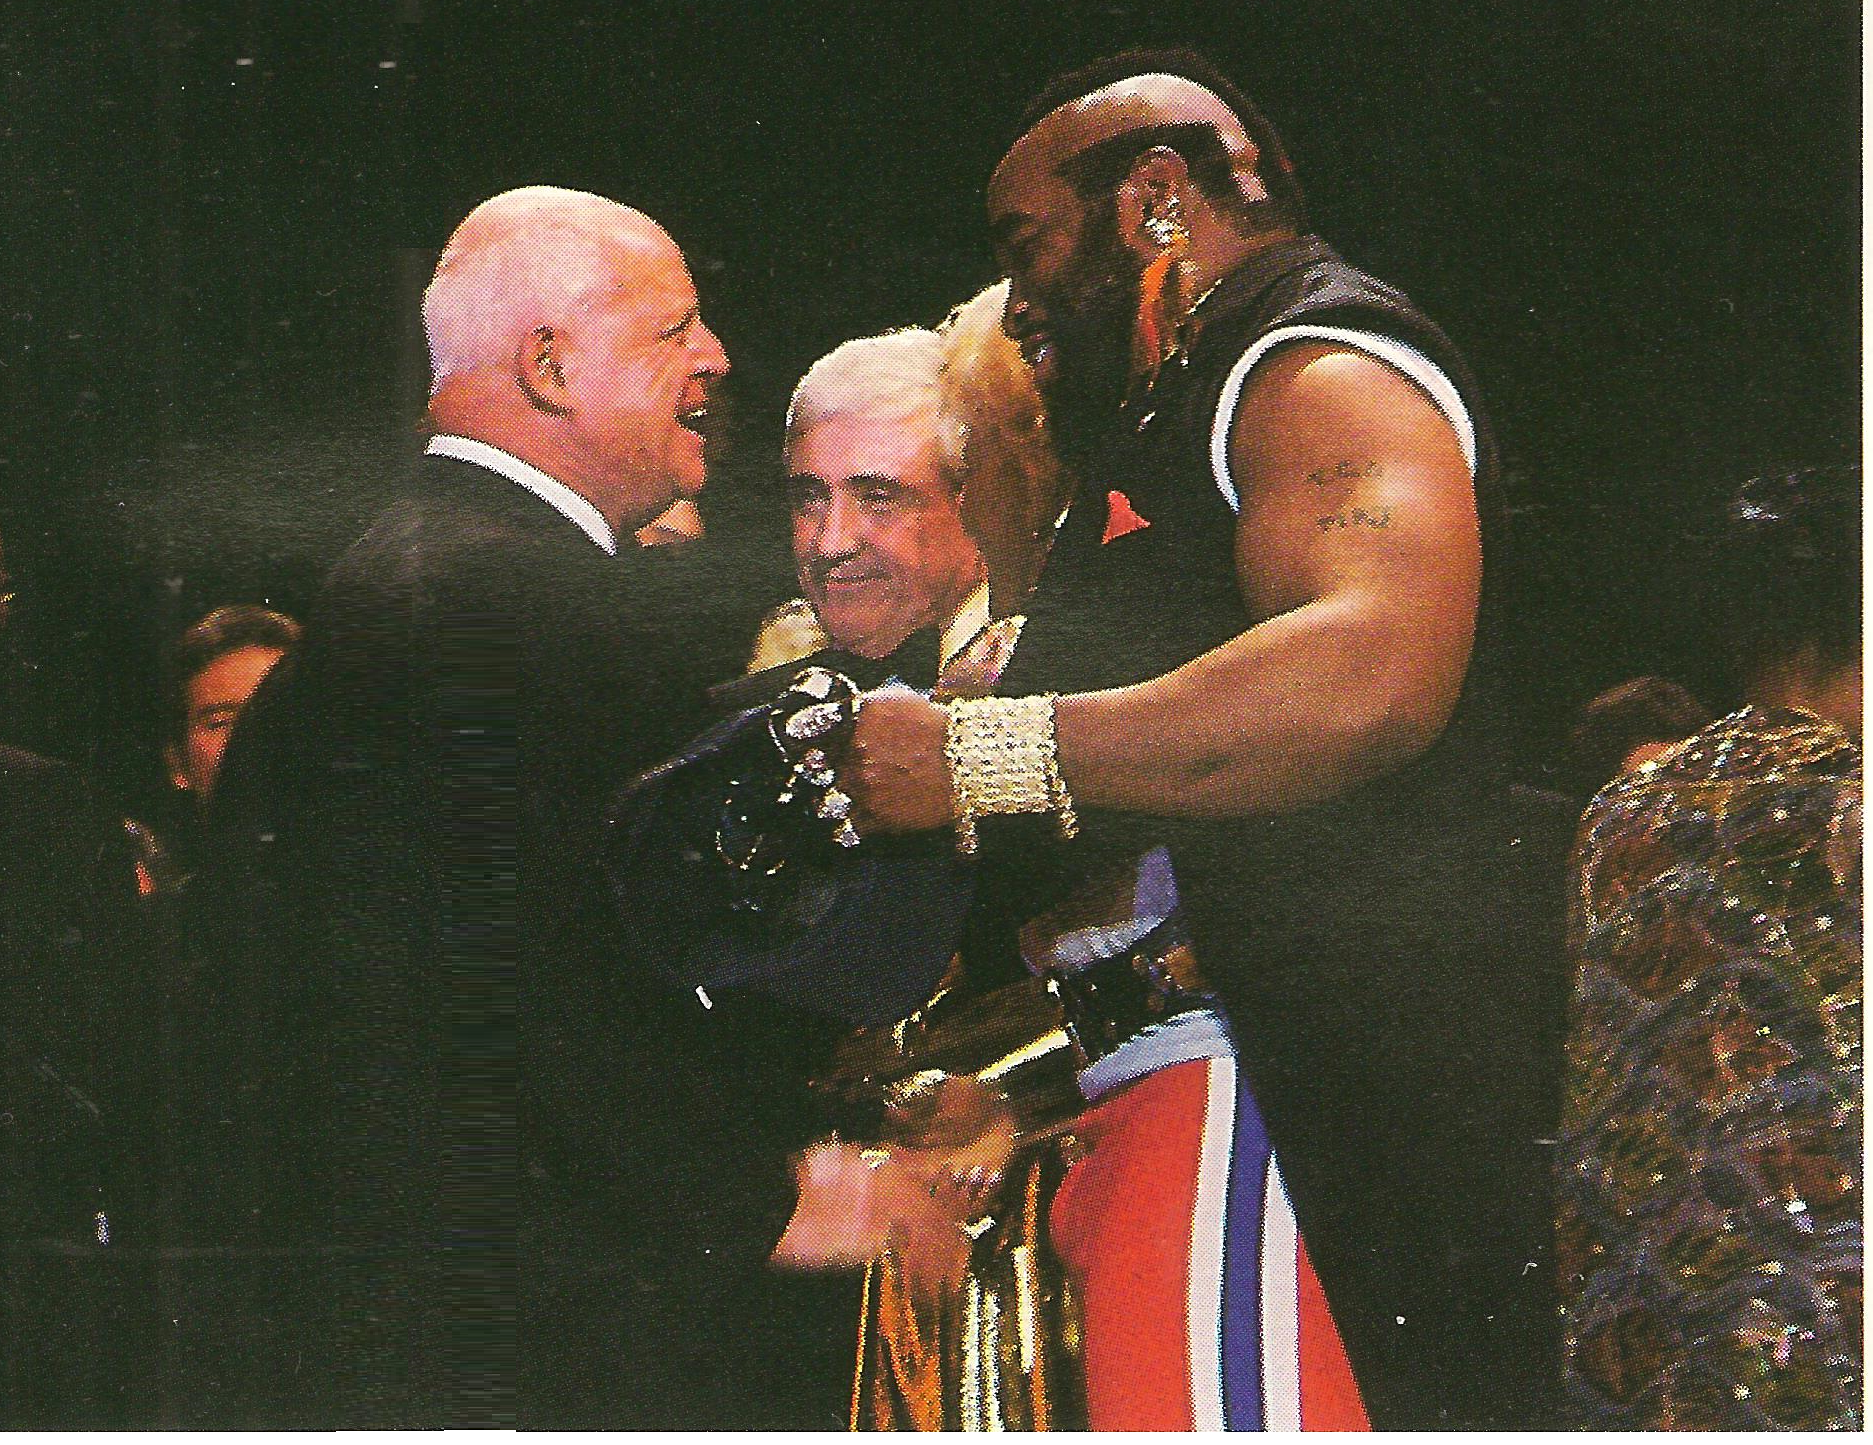 Don Rickles, Merv Griffin and Mr. T at the 1985 Inaugural Gala.